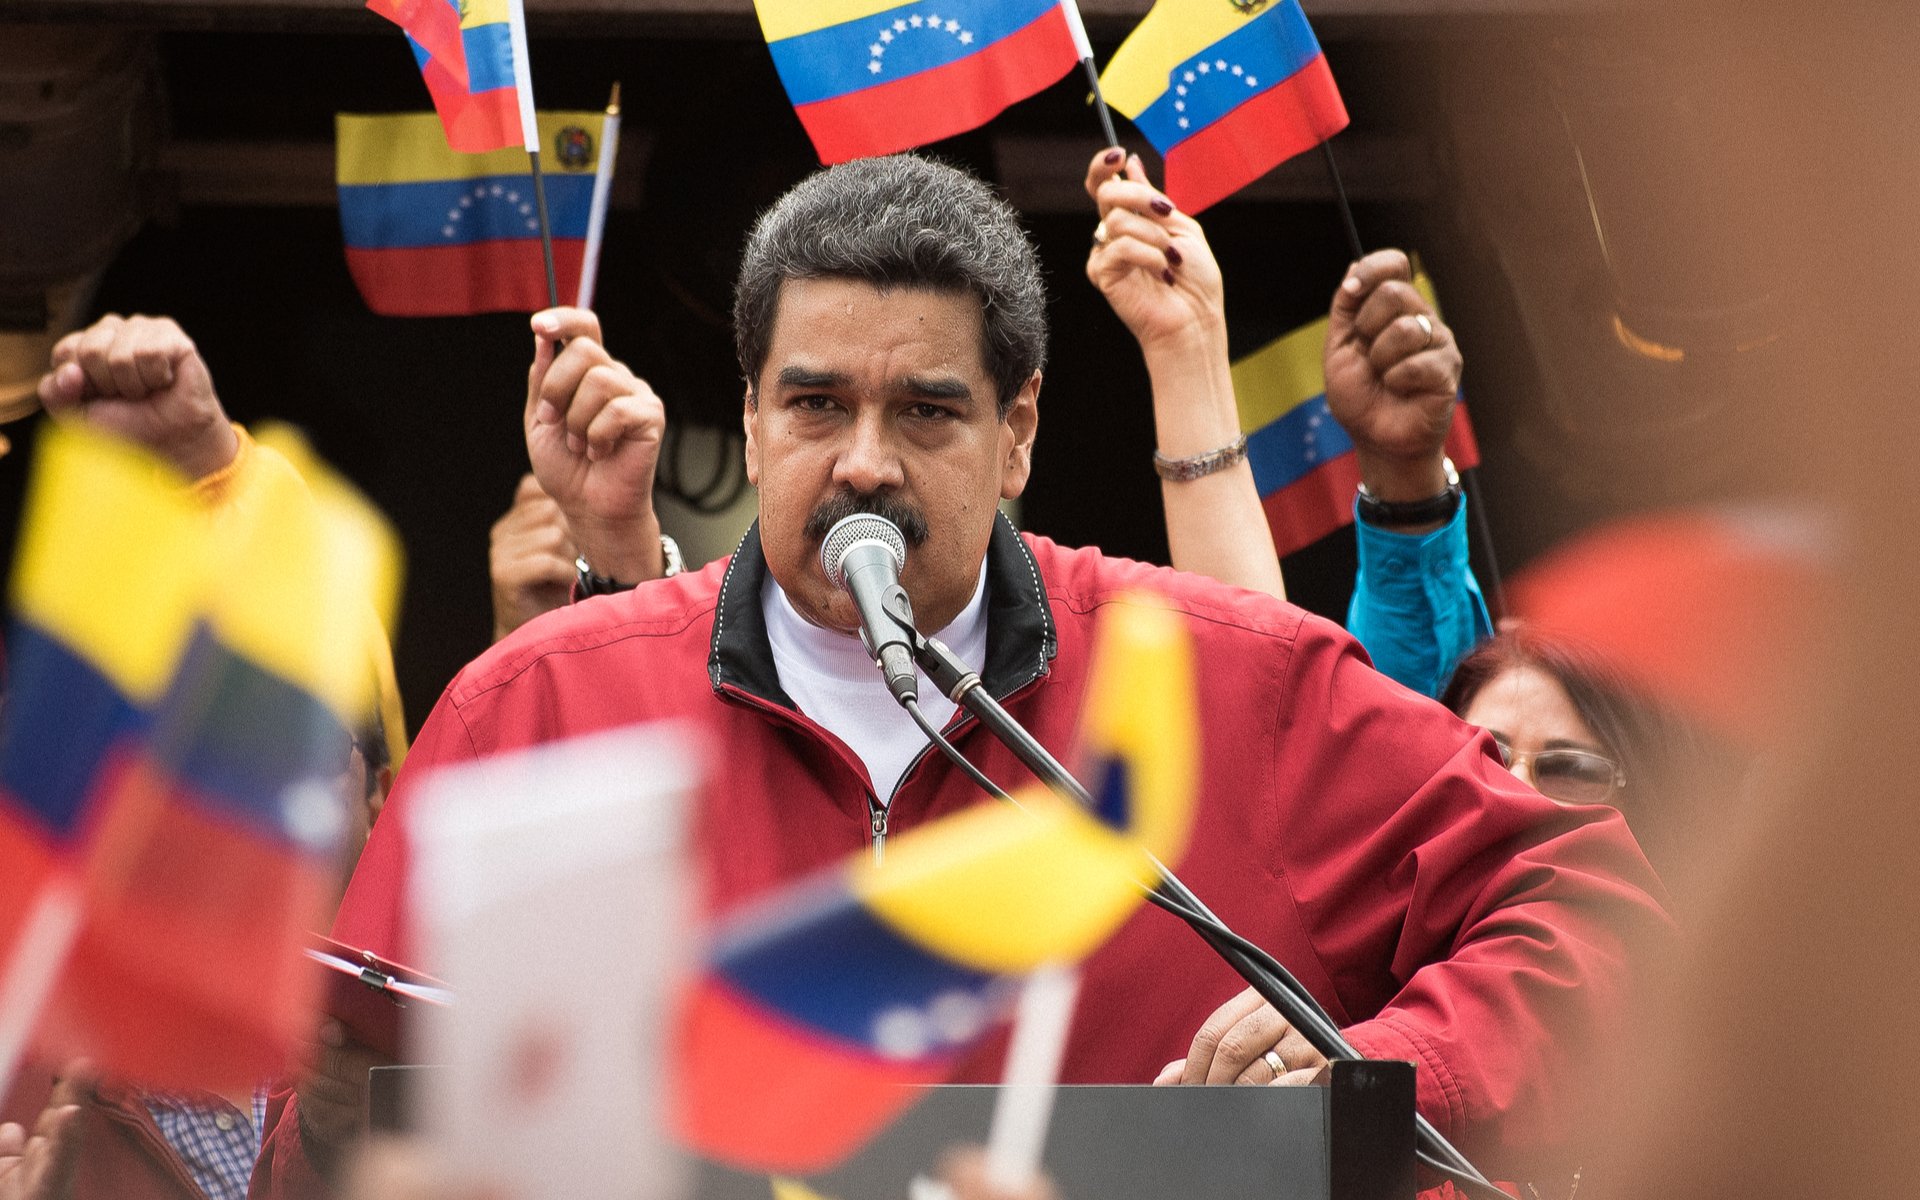 Venezuela Sold $5 Billion in Petro Cryptocurrency, Claims President